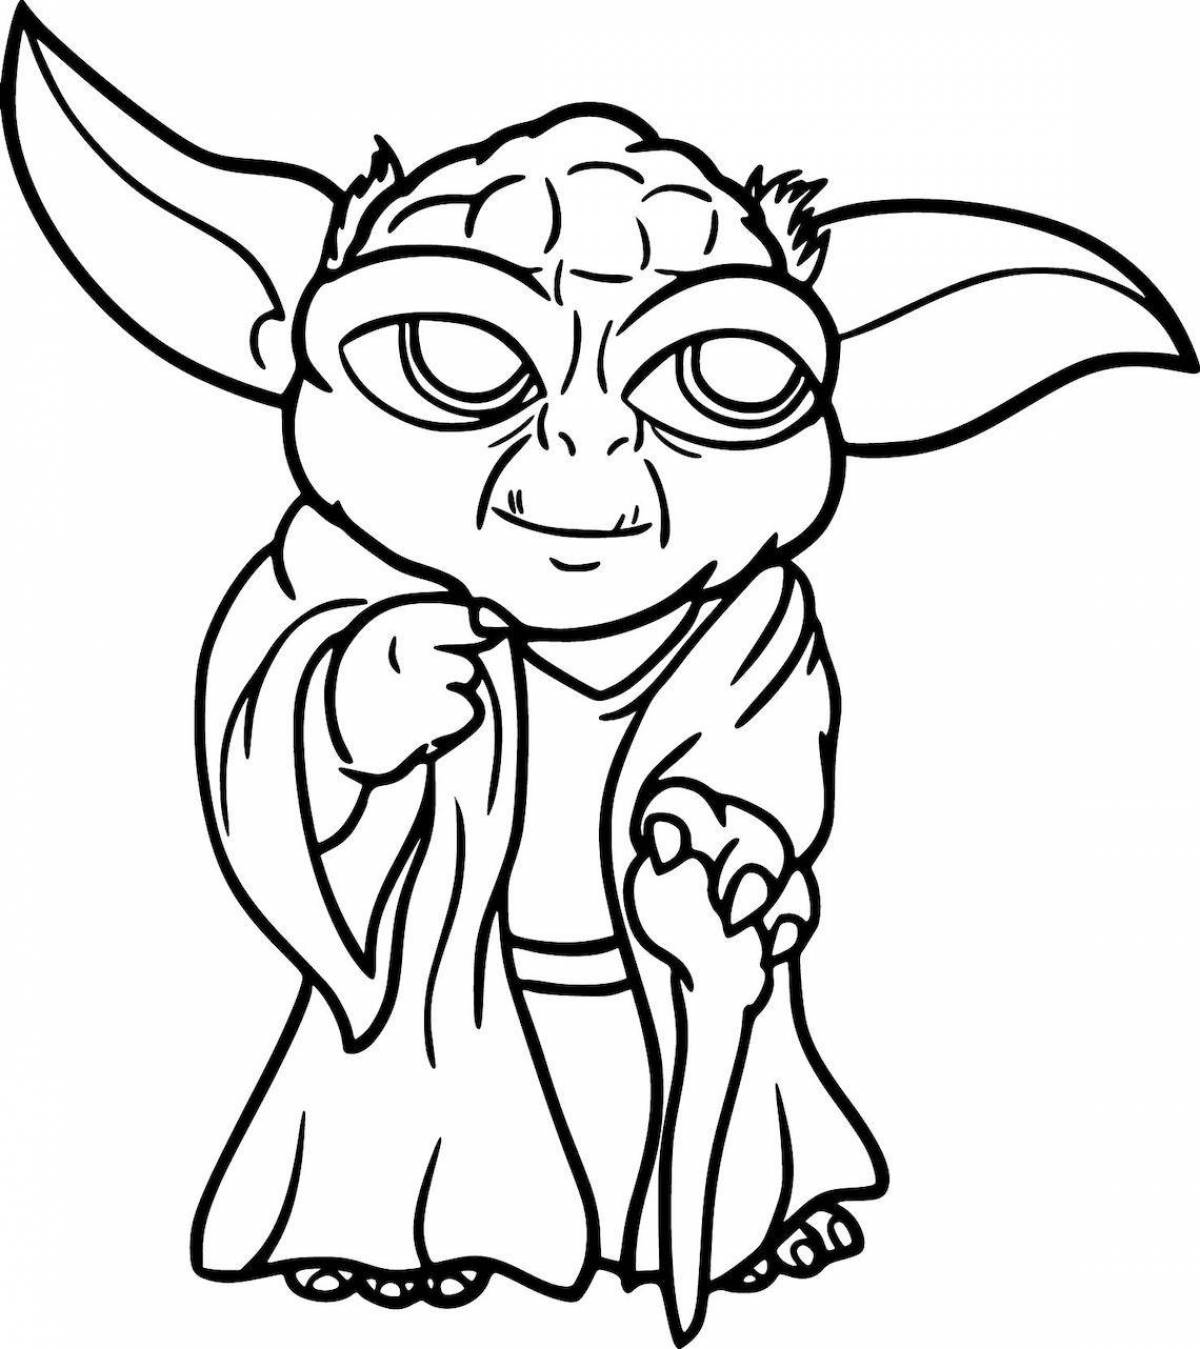 Prominent Yoda coloring page